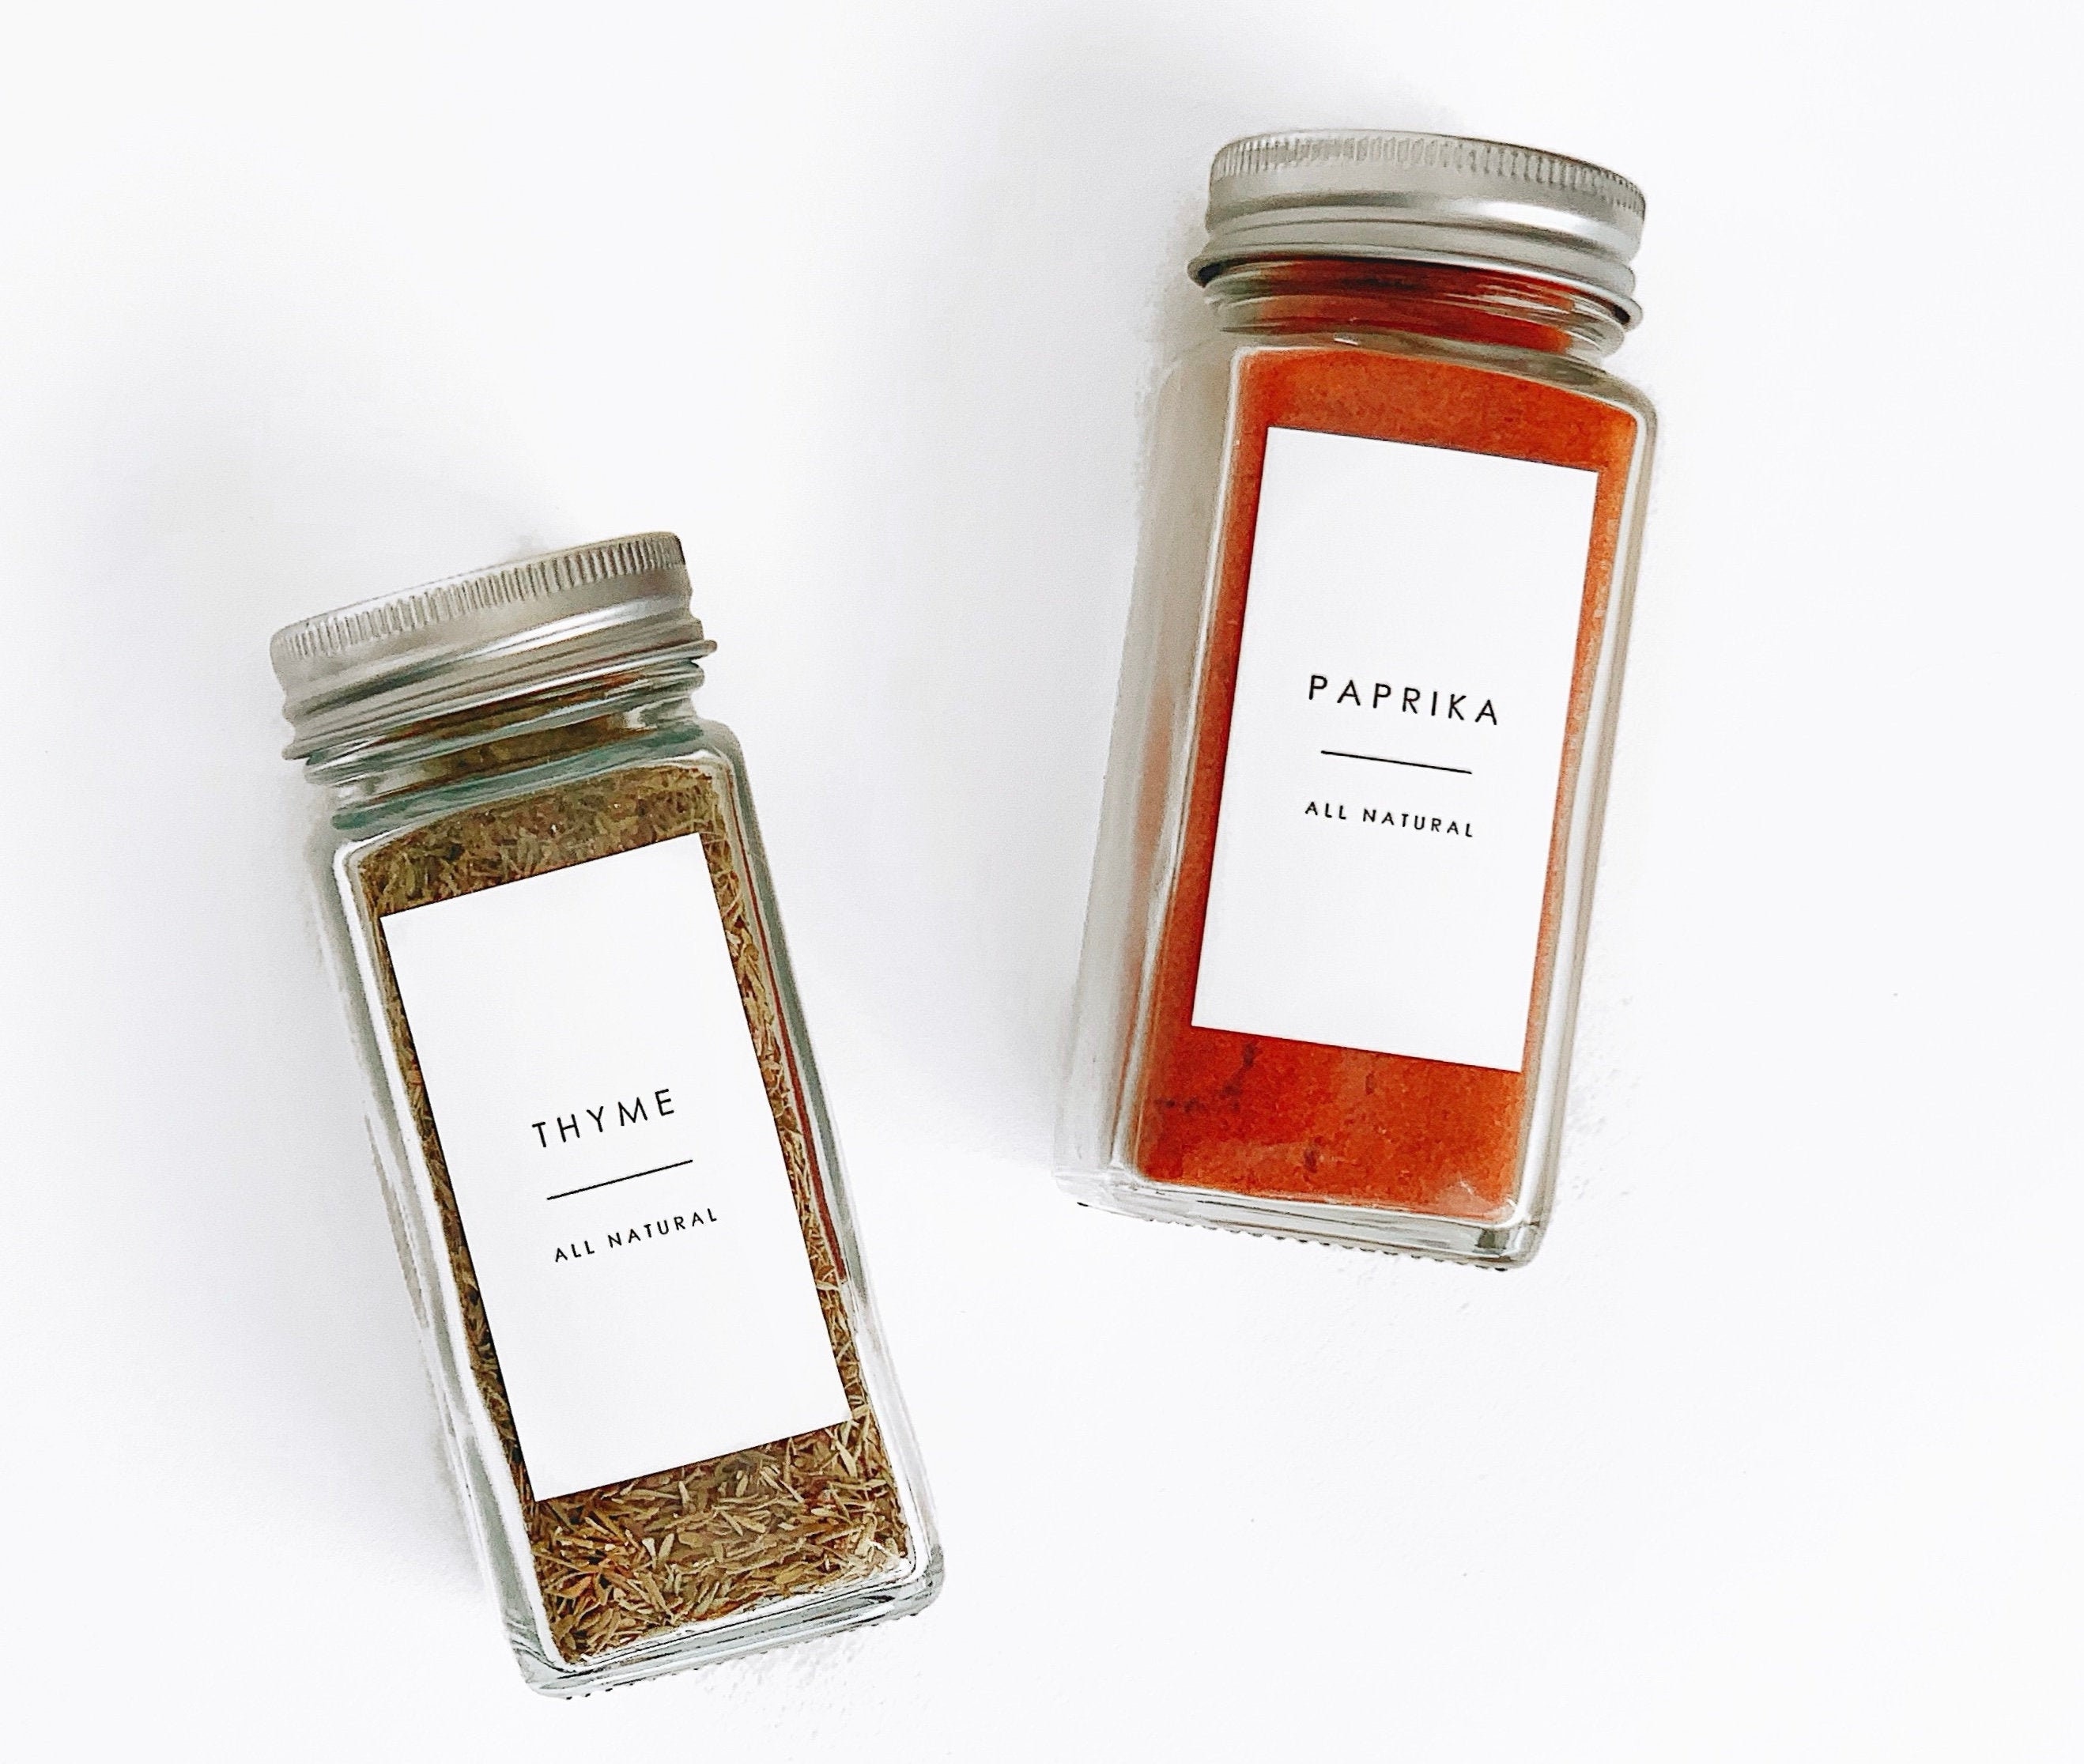 1.25 X 2.25 Inch Editable Spice Labels Modern Pantry Label Kitchen